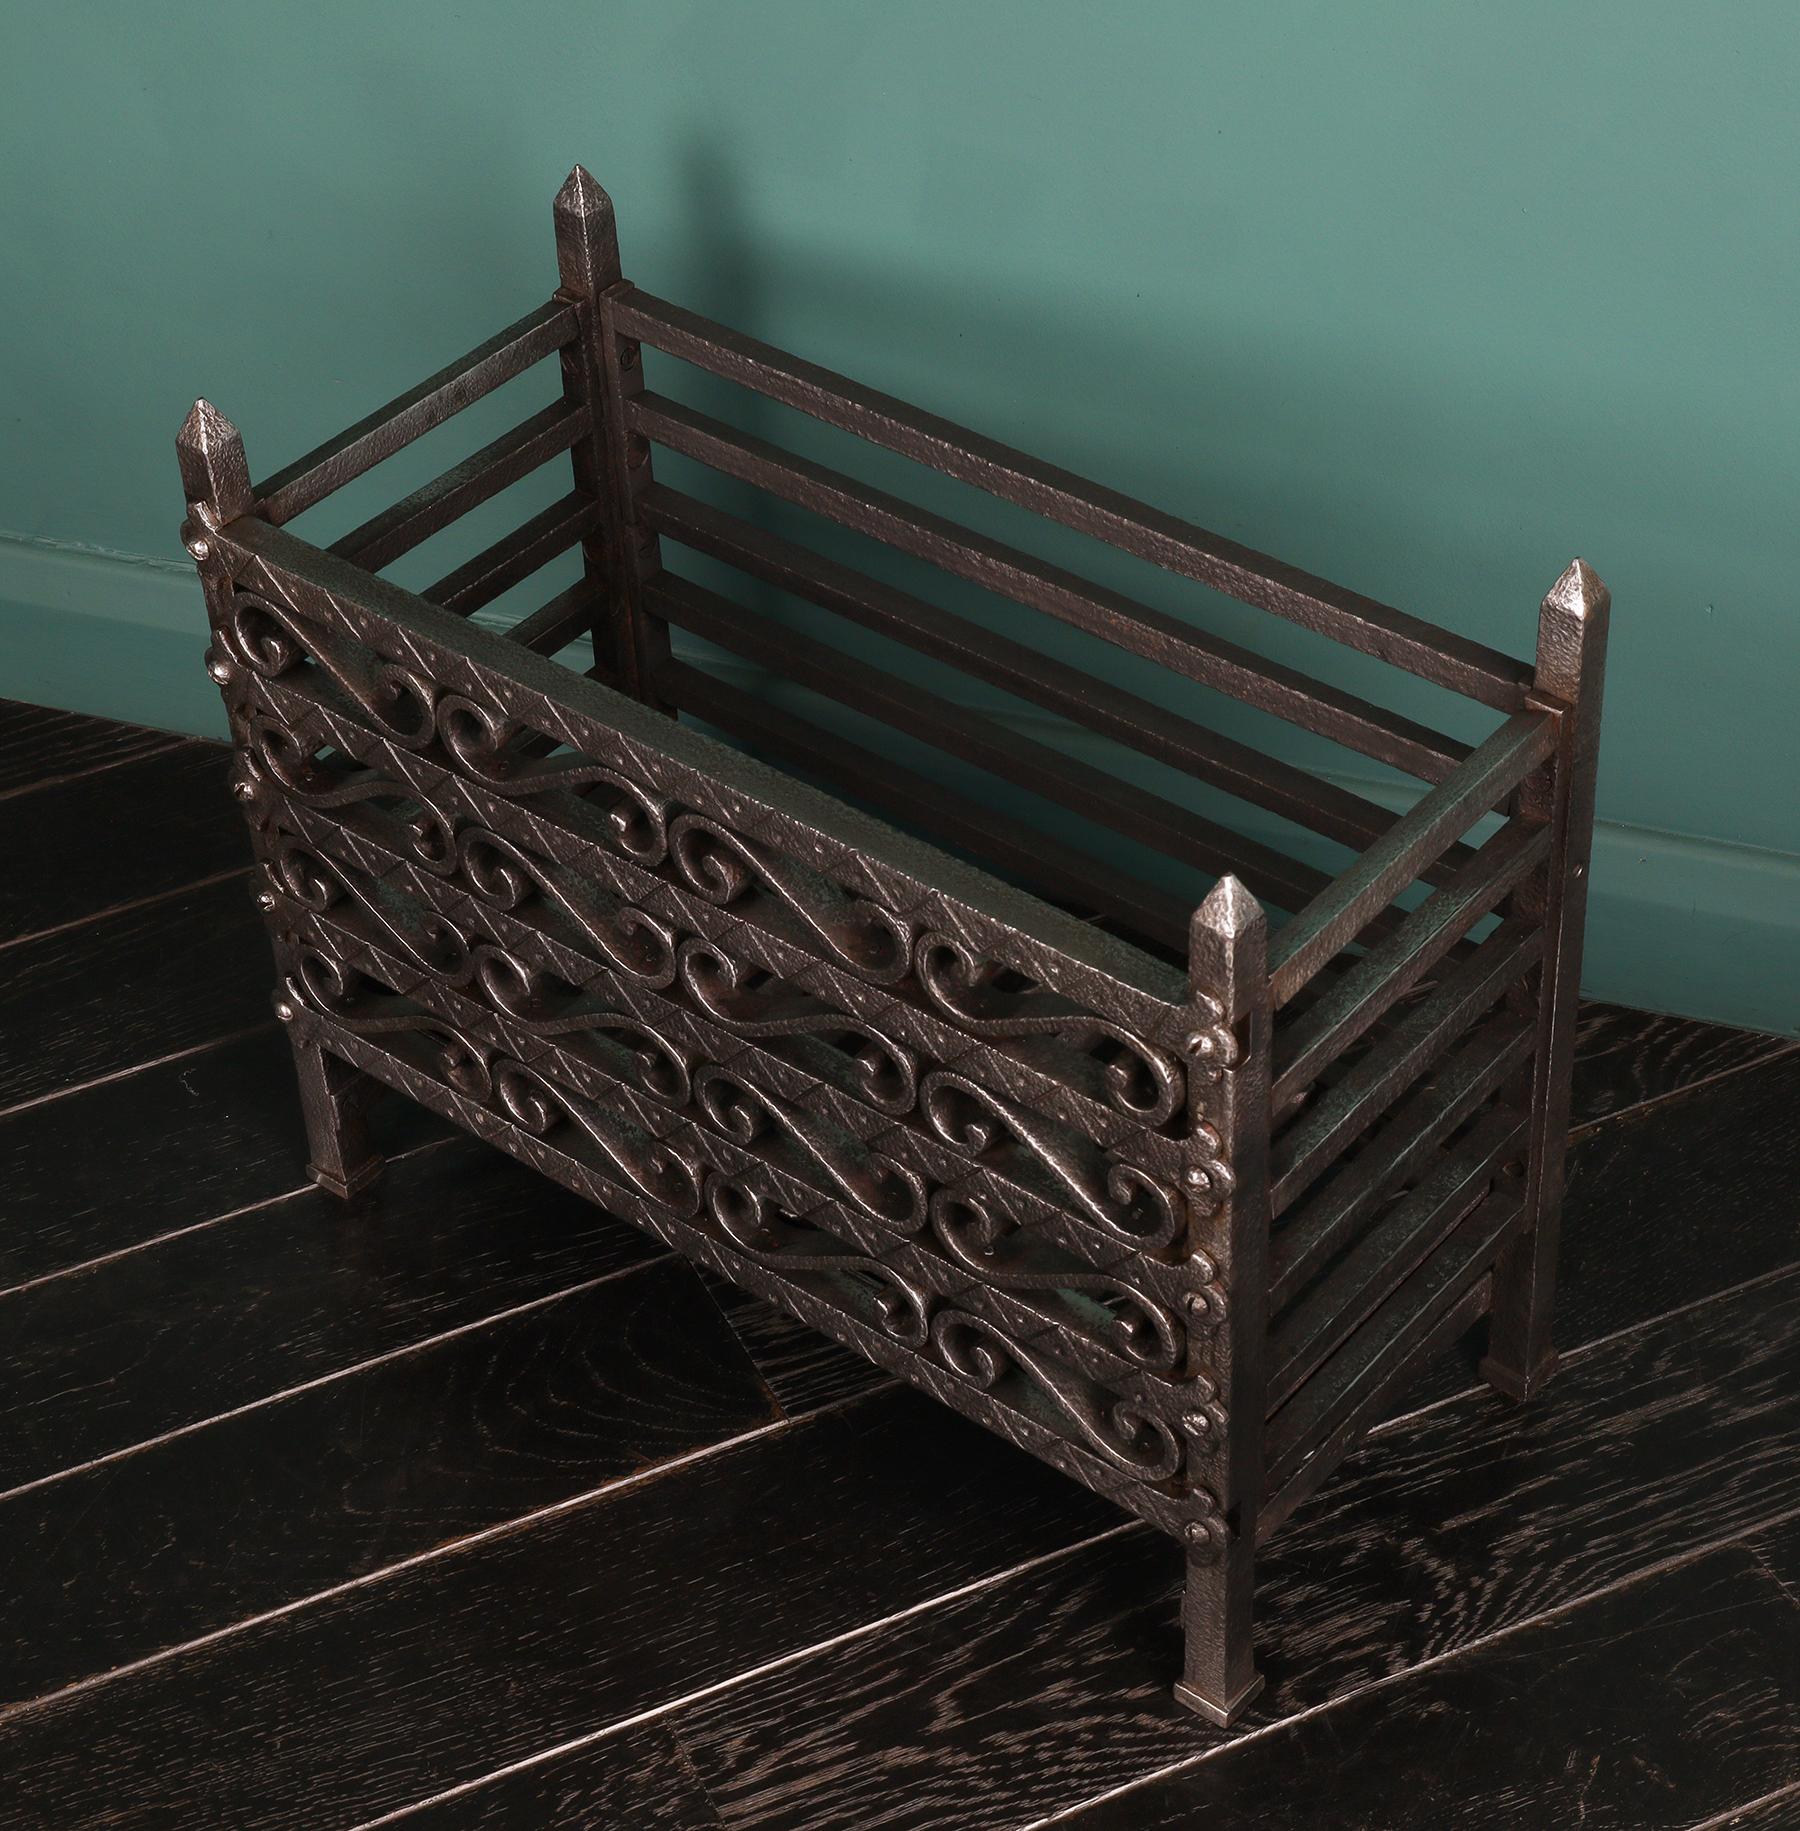 An ornate polished wrought iron fire basket intricately constructed with worked scrolls set between incised front fire bars. The rectangular blacksmith-made basket supported on plinth feet with pinnacle corner log-stops uppermost. Restored.
Height